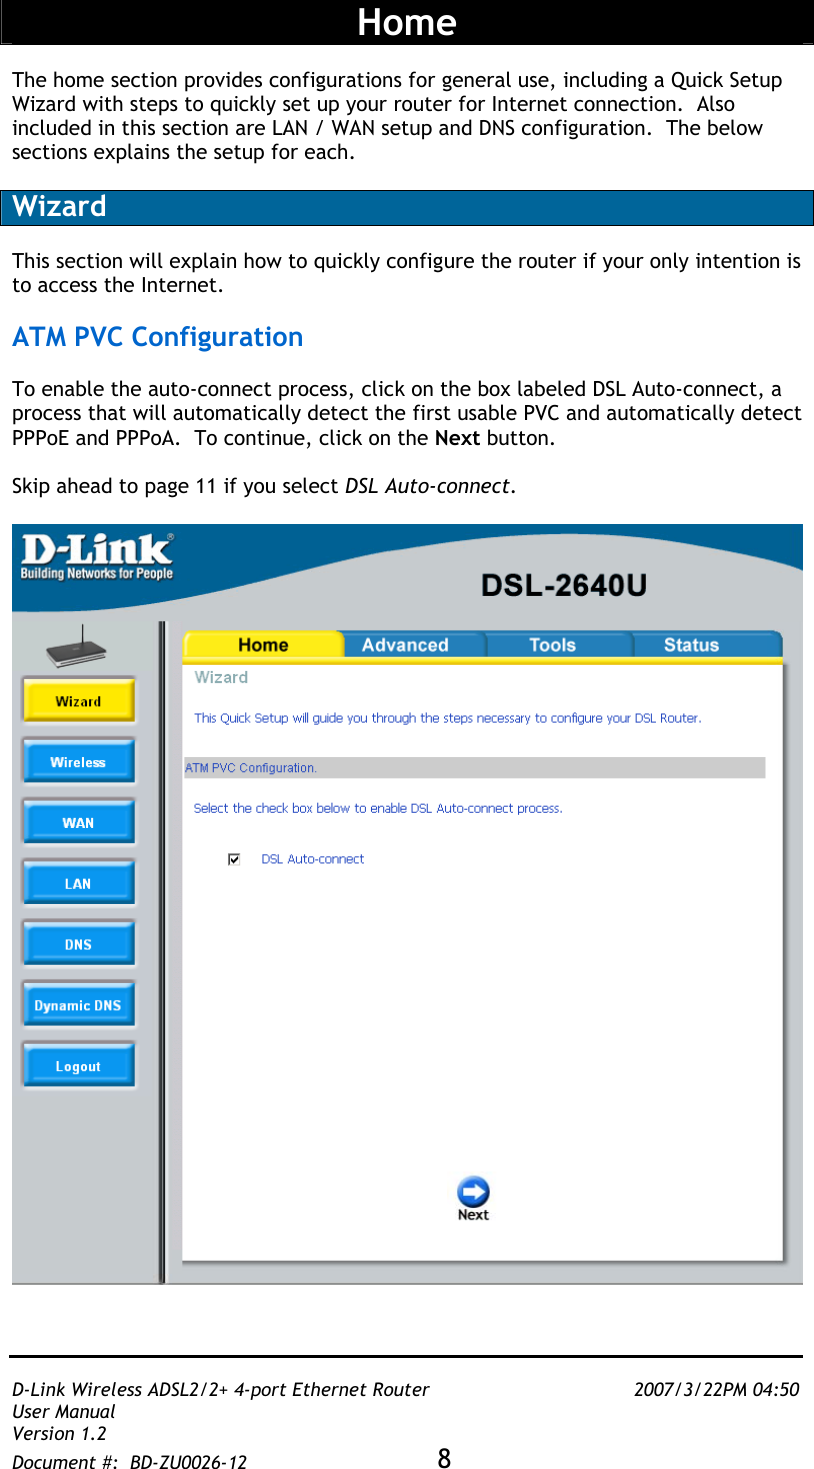   D-Link Wireless ADSL2/2+ 4-port Ethernet Router    2007/3/22PM 04:50 User Manual   Version 1.2 Document #:  BD-ZU0026-12 8    Home  The home section provides configurations for general use, including a Quick Setup Wizard with steps to quickly set up your router for Internet connection.  Also included in this section are LAN / WAN setup and DNS configuration.  The below sections explains the setup for each.  Wizard  This section will explain how to quickly configure the router if your only intention is to access the Internet.    ATM PVC Configuration  To enable the auto-connect process, click on the box labeled DSL Auto-connect, a process that will automatically detect the first usable PVC and automatically detect PPPoE and PPPoA.  To continue, click on the Next button.   Skip ahead to page 11 if you select DSL Auto-connect.    